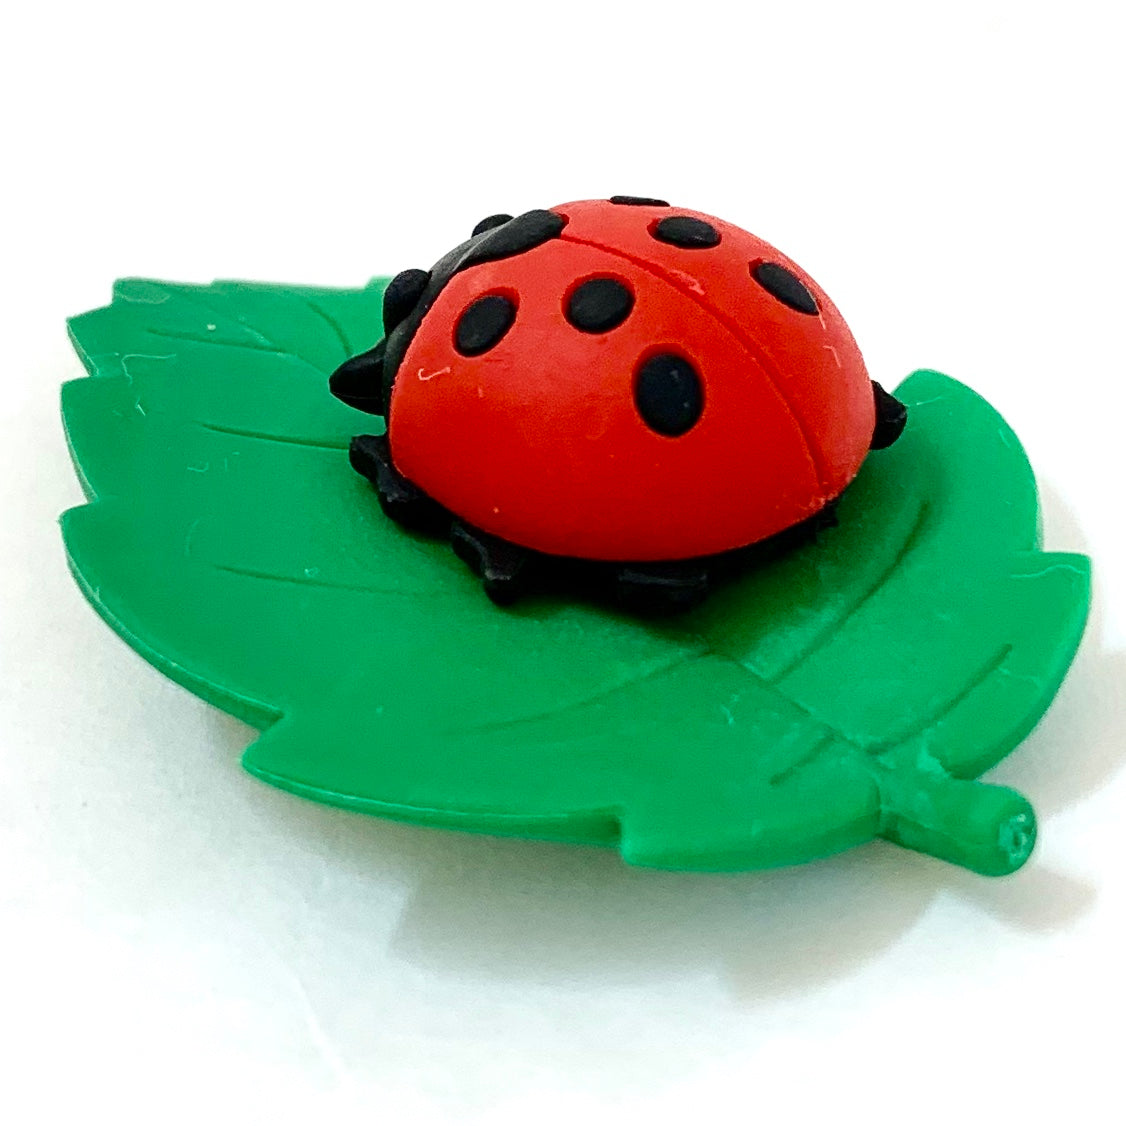 Insect World - Buy Eraser Clay, eraser clay insect toy, clay insect toy  Product on PAULINDA INDUSTRIES(1999) LTD.